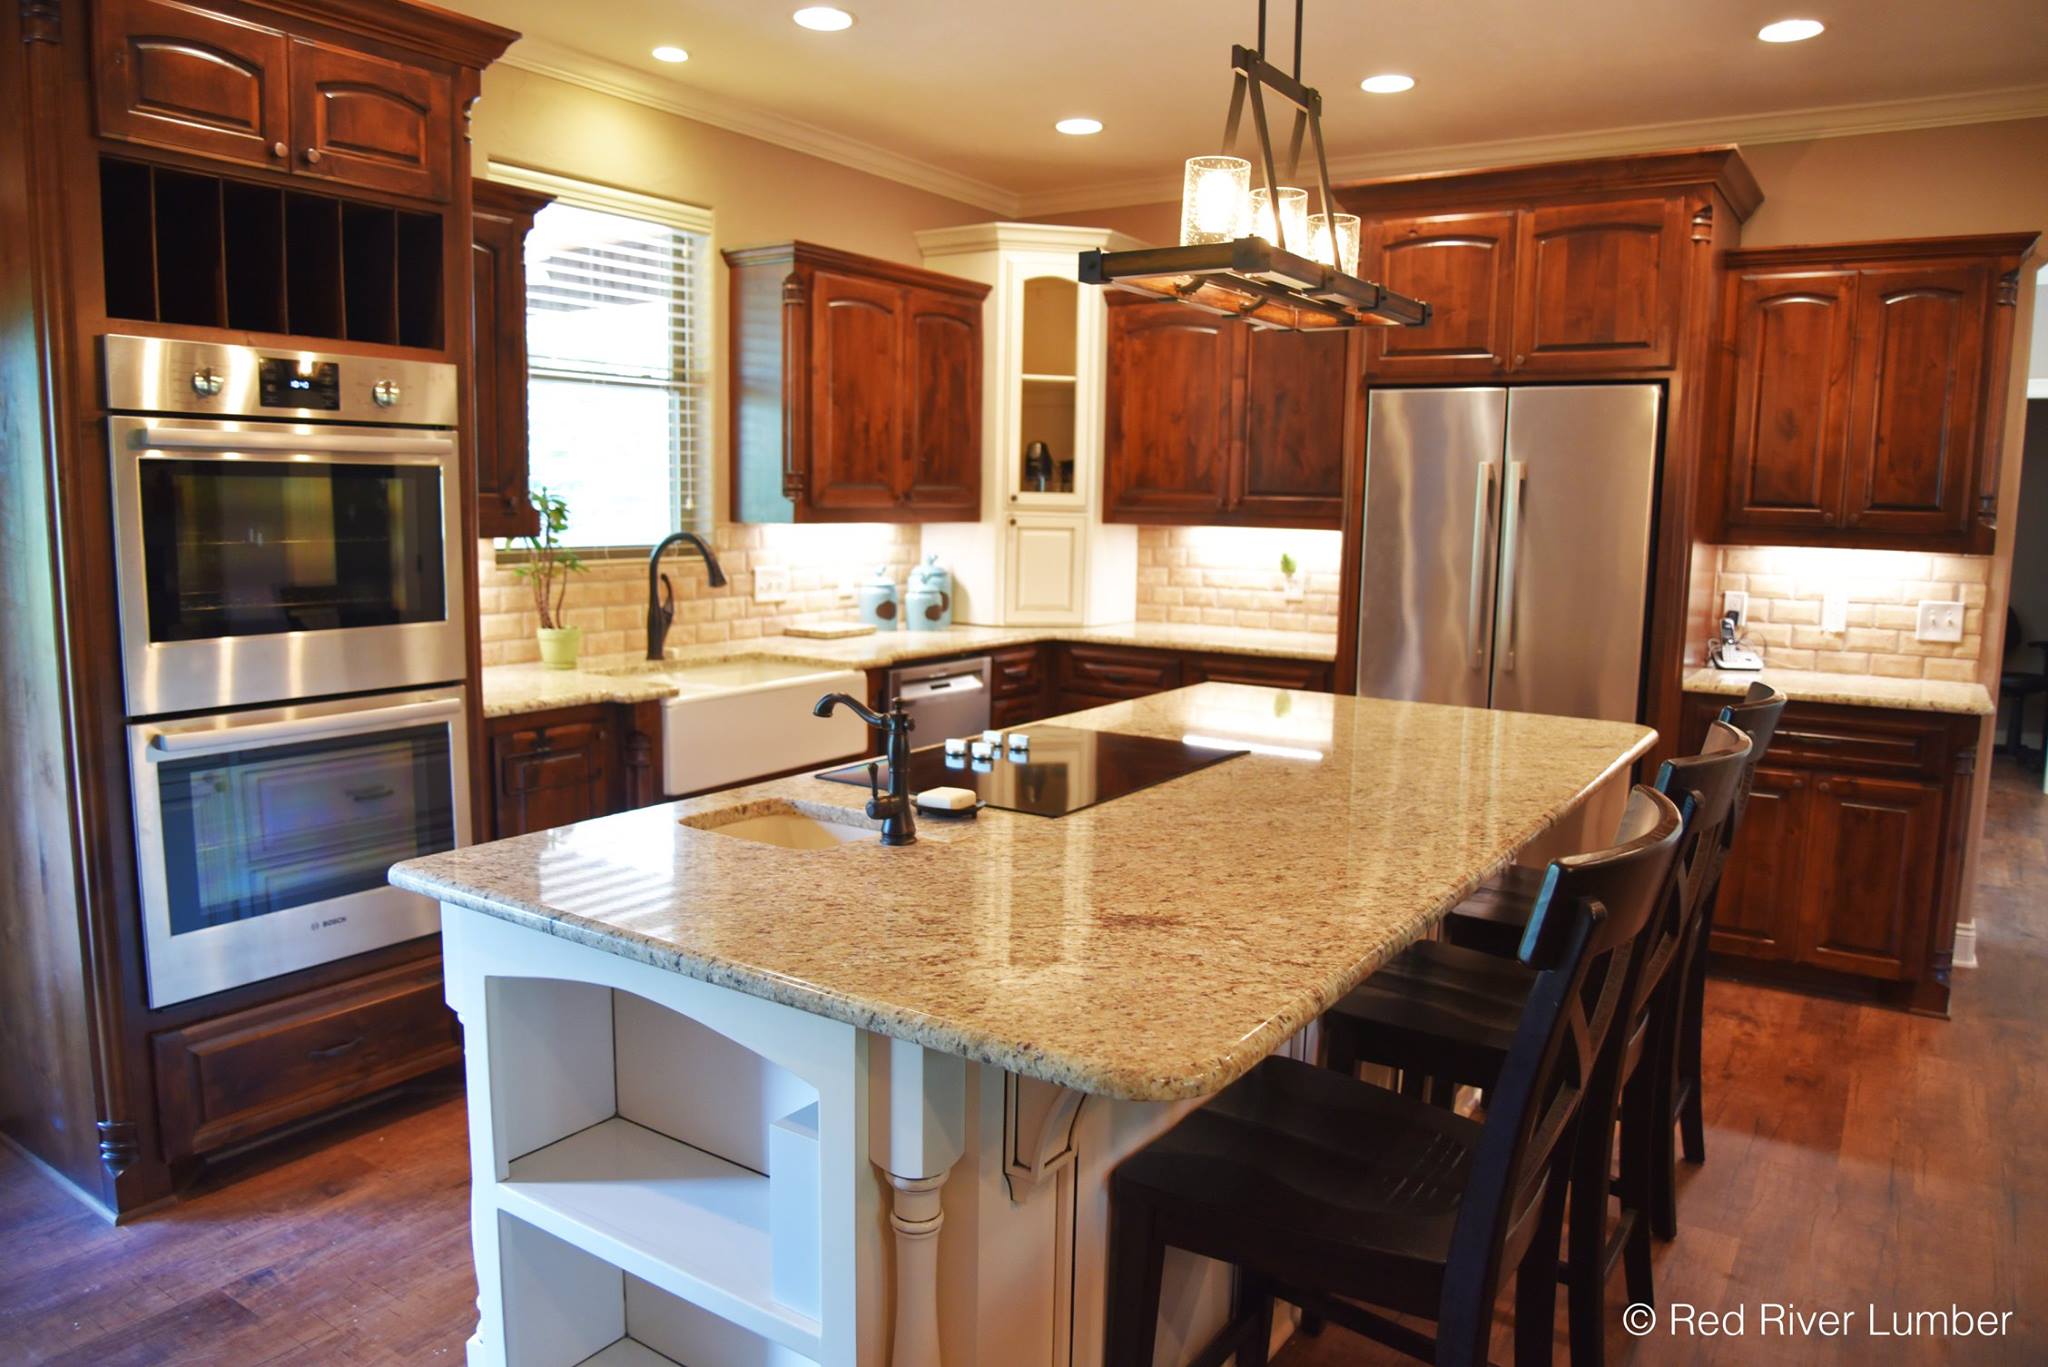  We supplied cabinet materials,&nbsp; Bosch Home &nbsp;Appliances, fabricated/installed the Giudoni Ornamental Granite Countertops, and supplied the luxury vinyl plank flooring. 